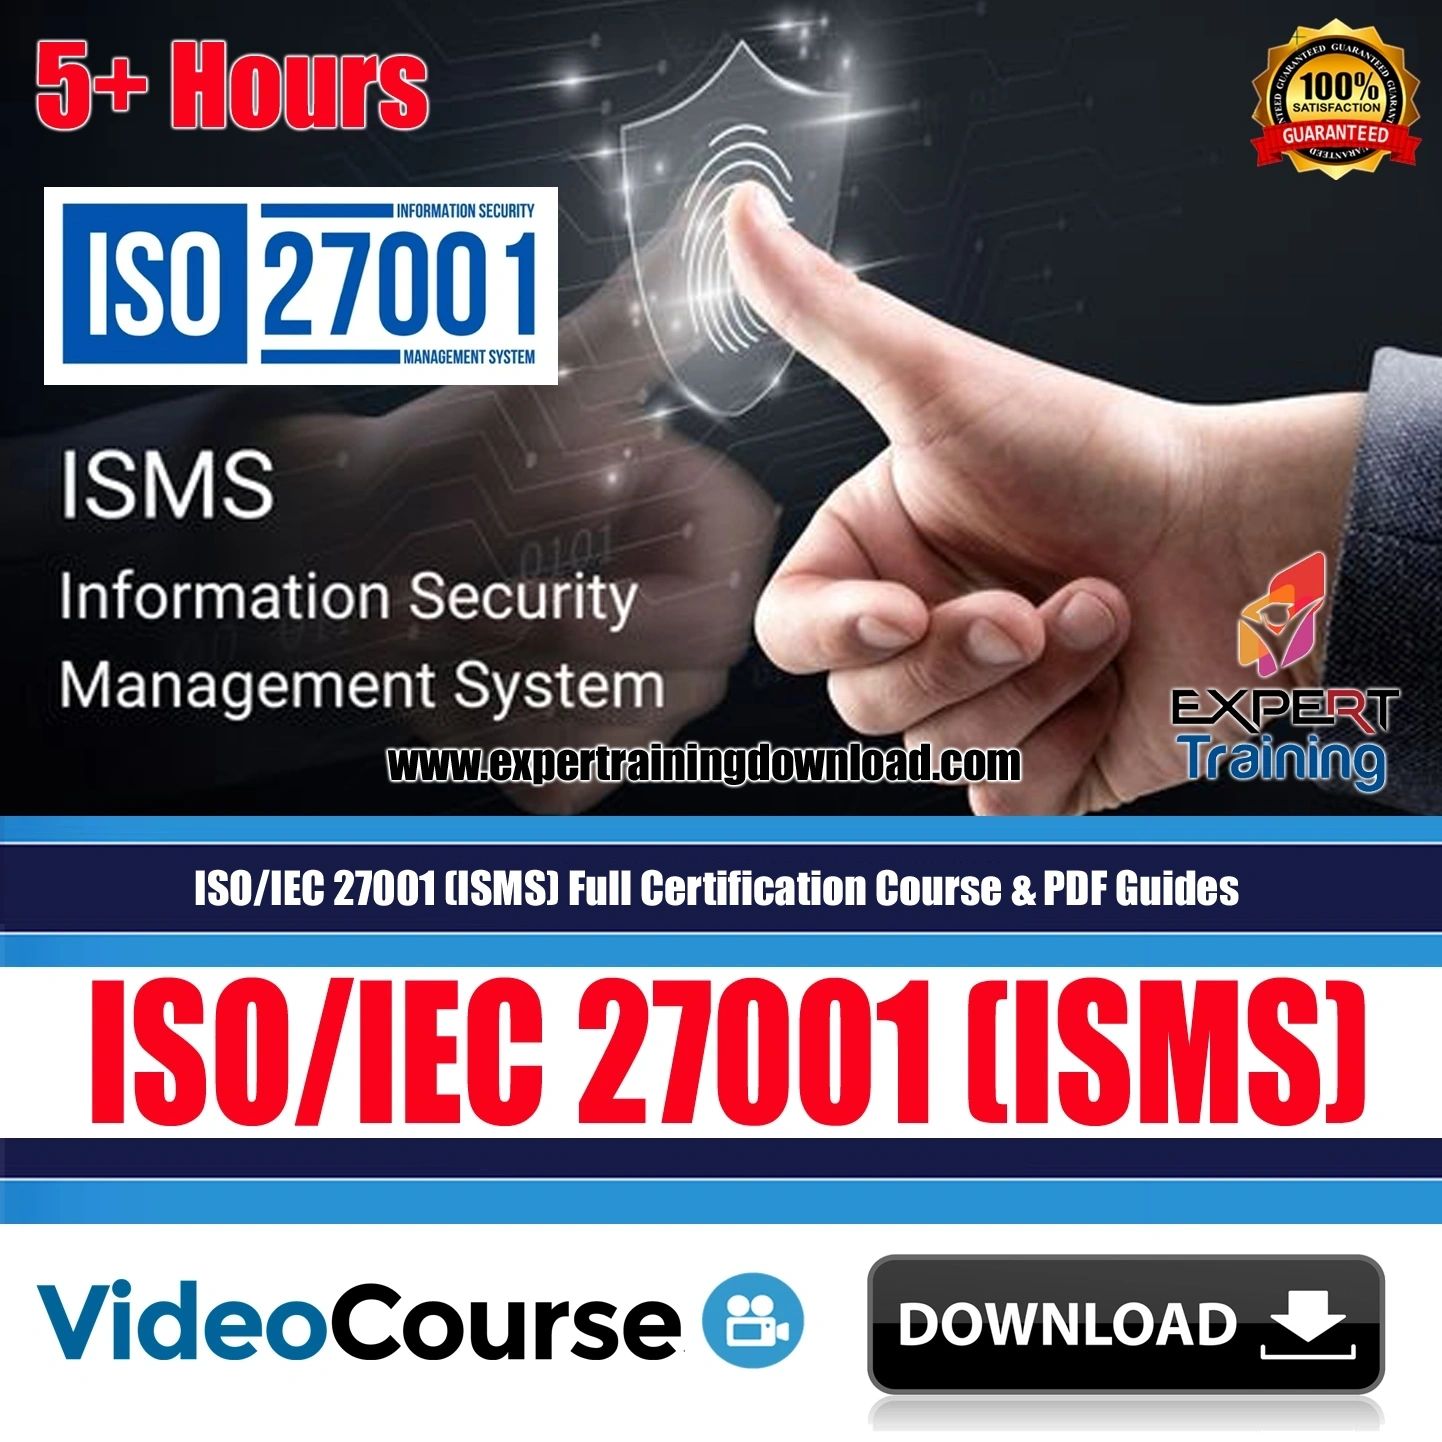 ISO-IEC 27001 (ISMS) Full Certification Course & PDF Guides